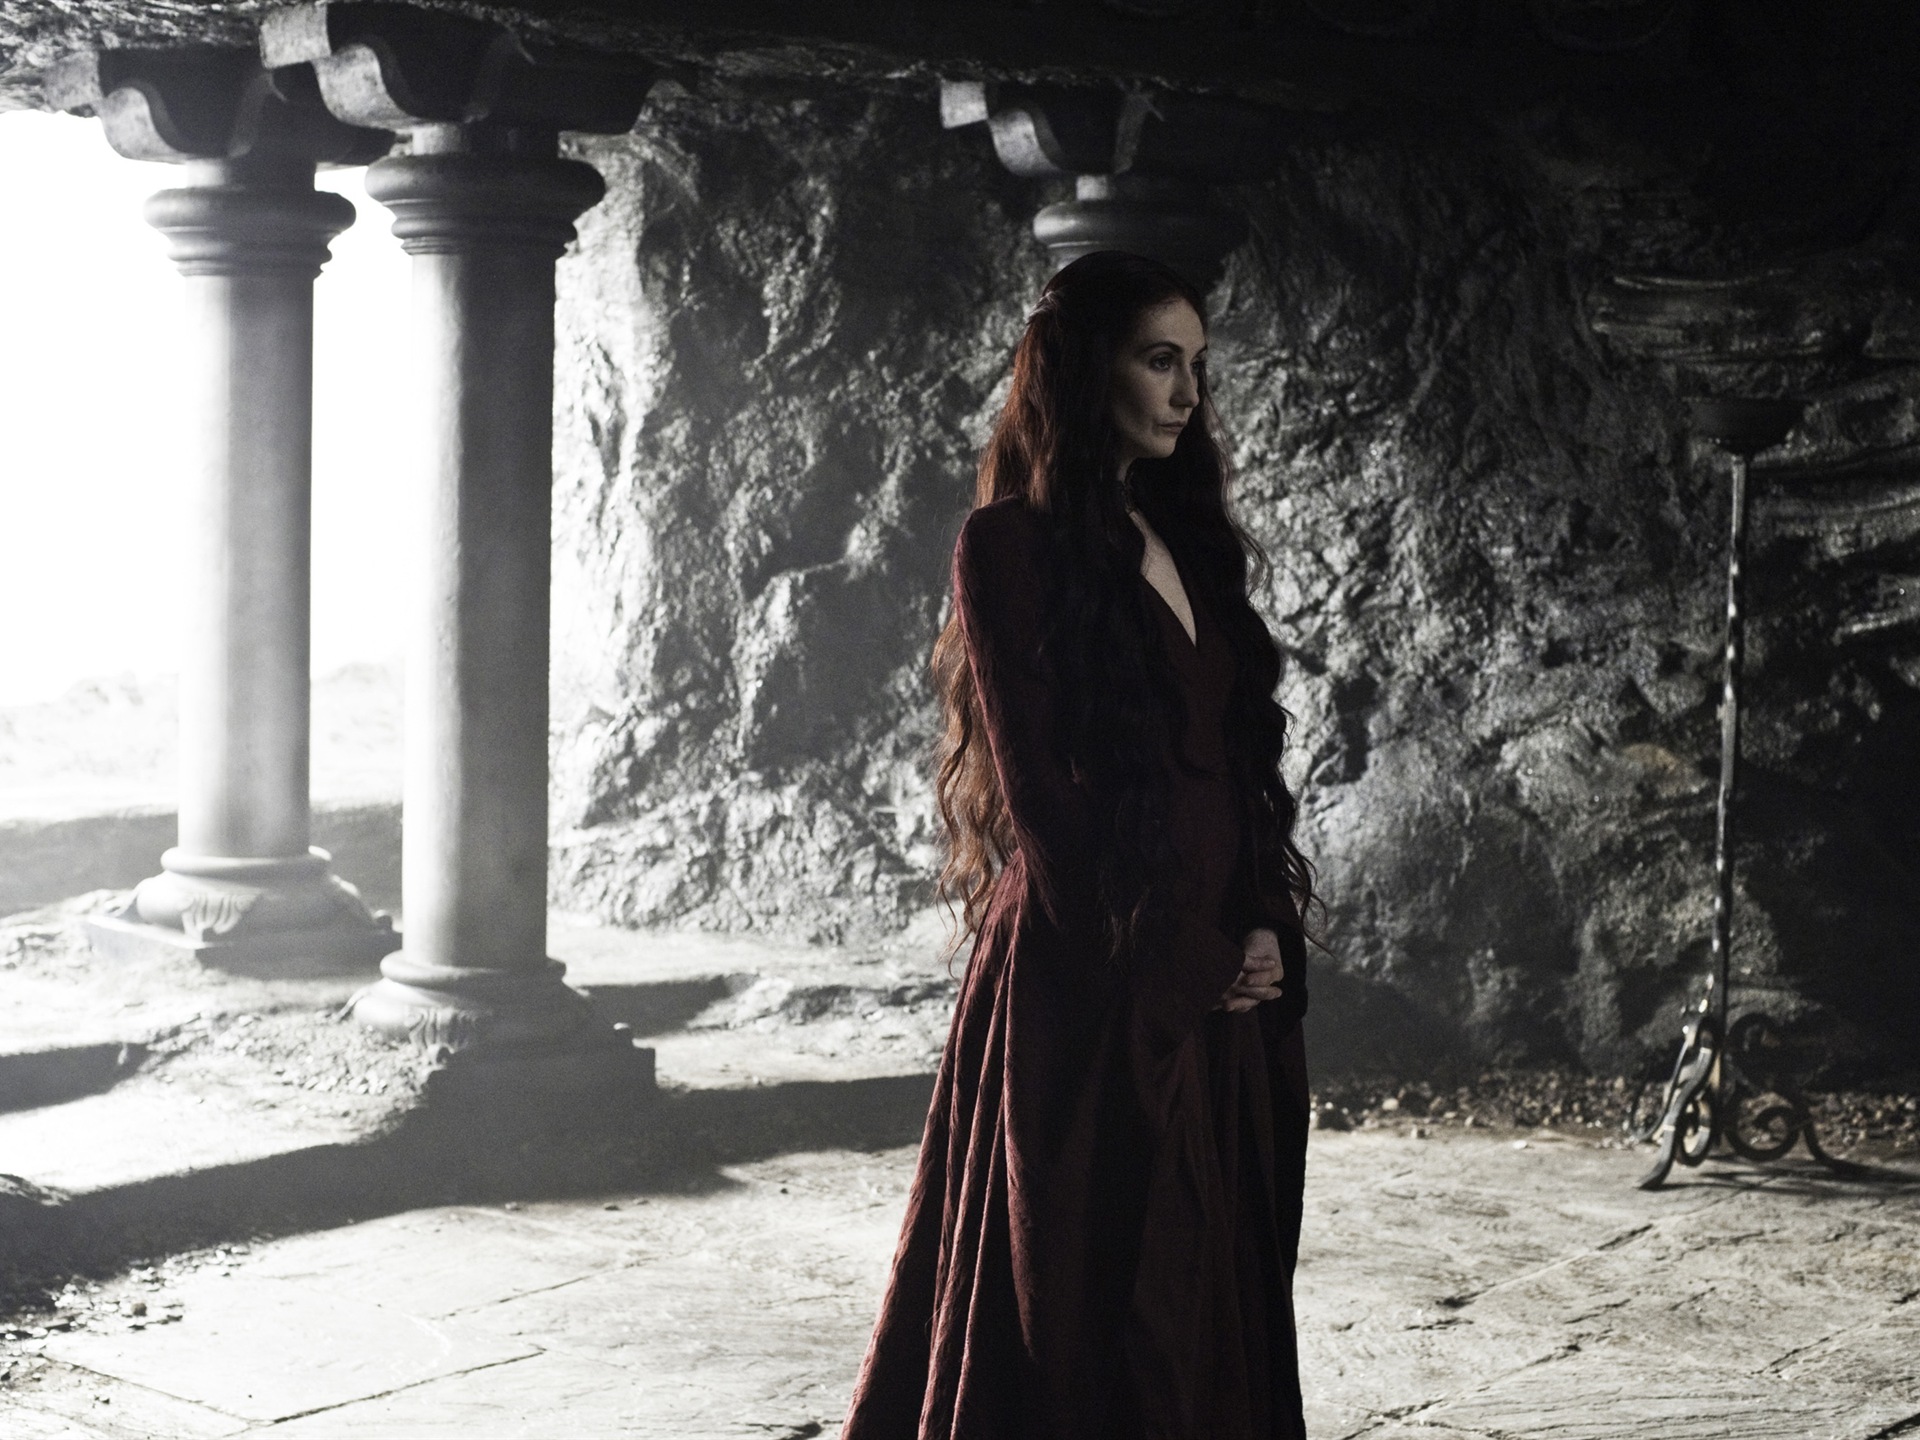 A Song of Ice and Fire: Game of Thrones HD wallpapers #34 - 1920x1440